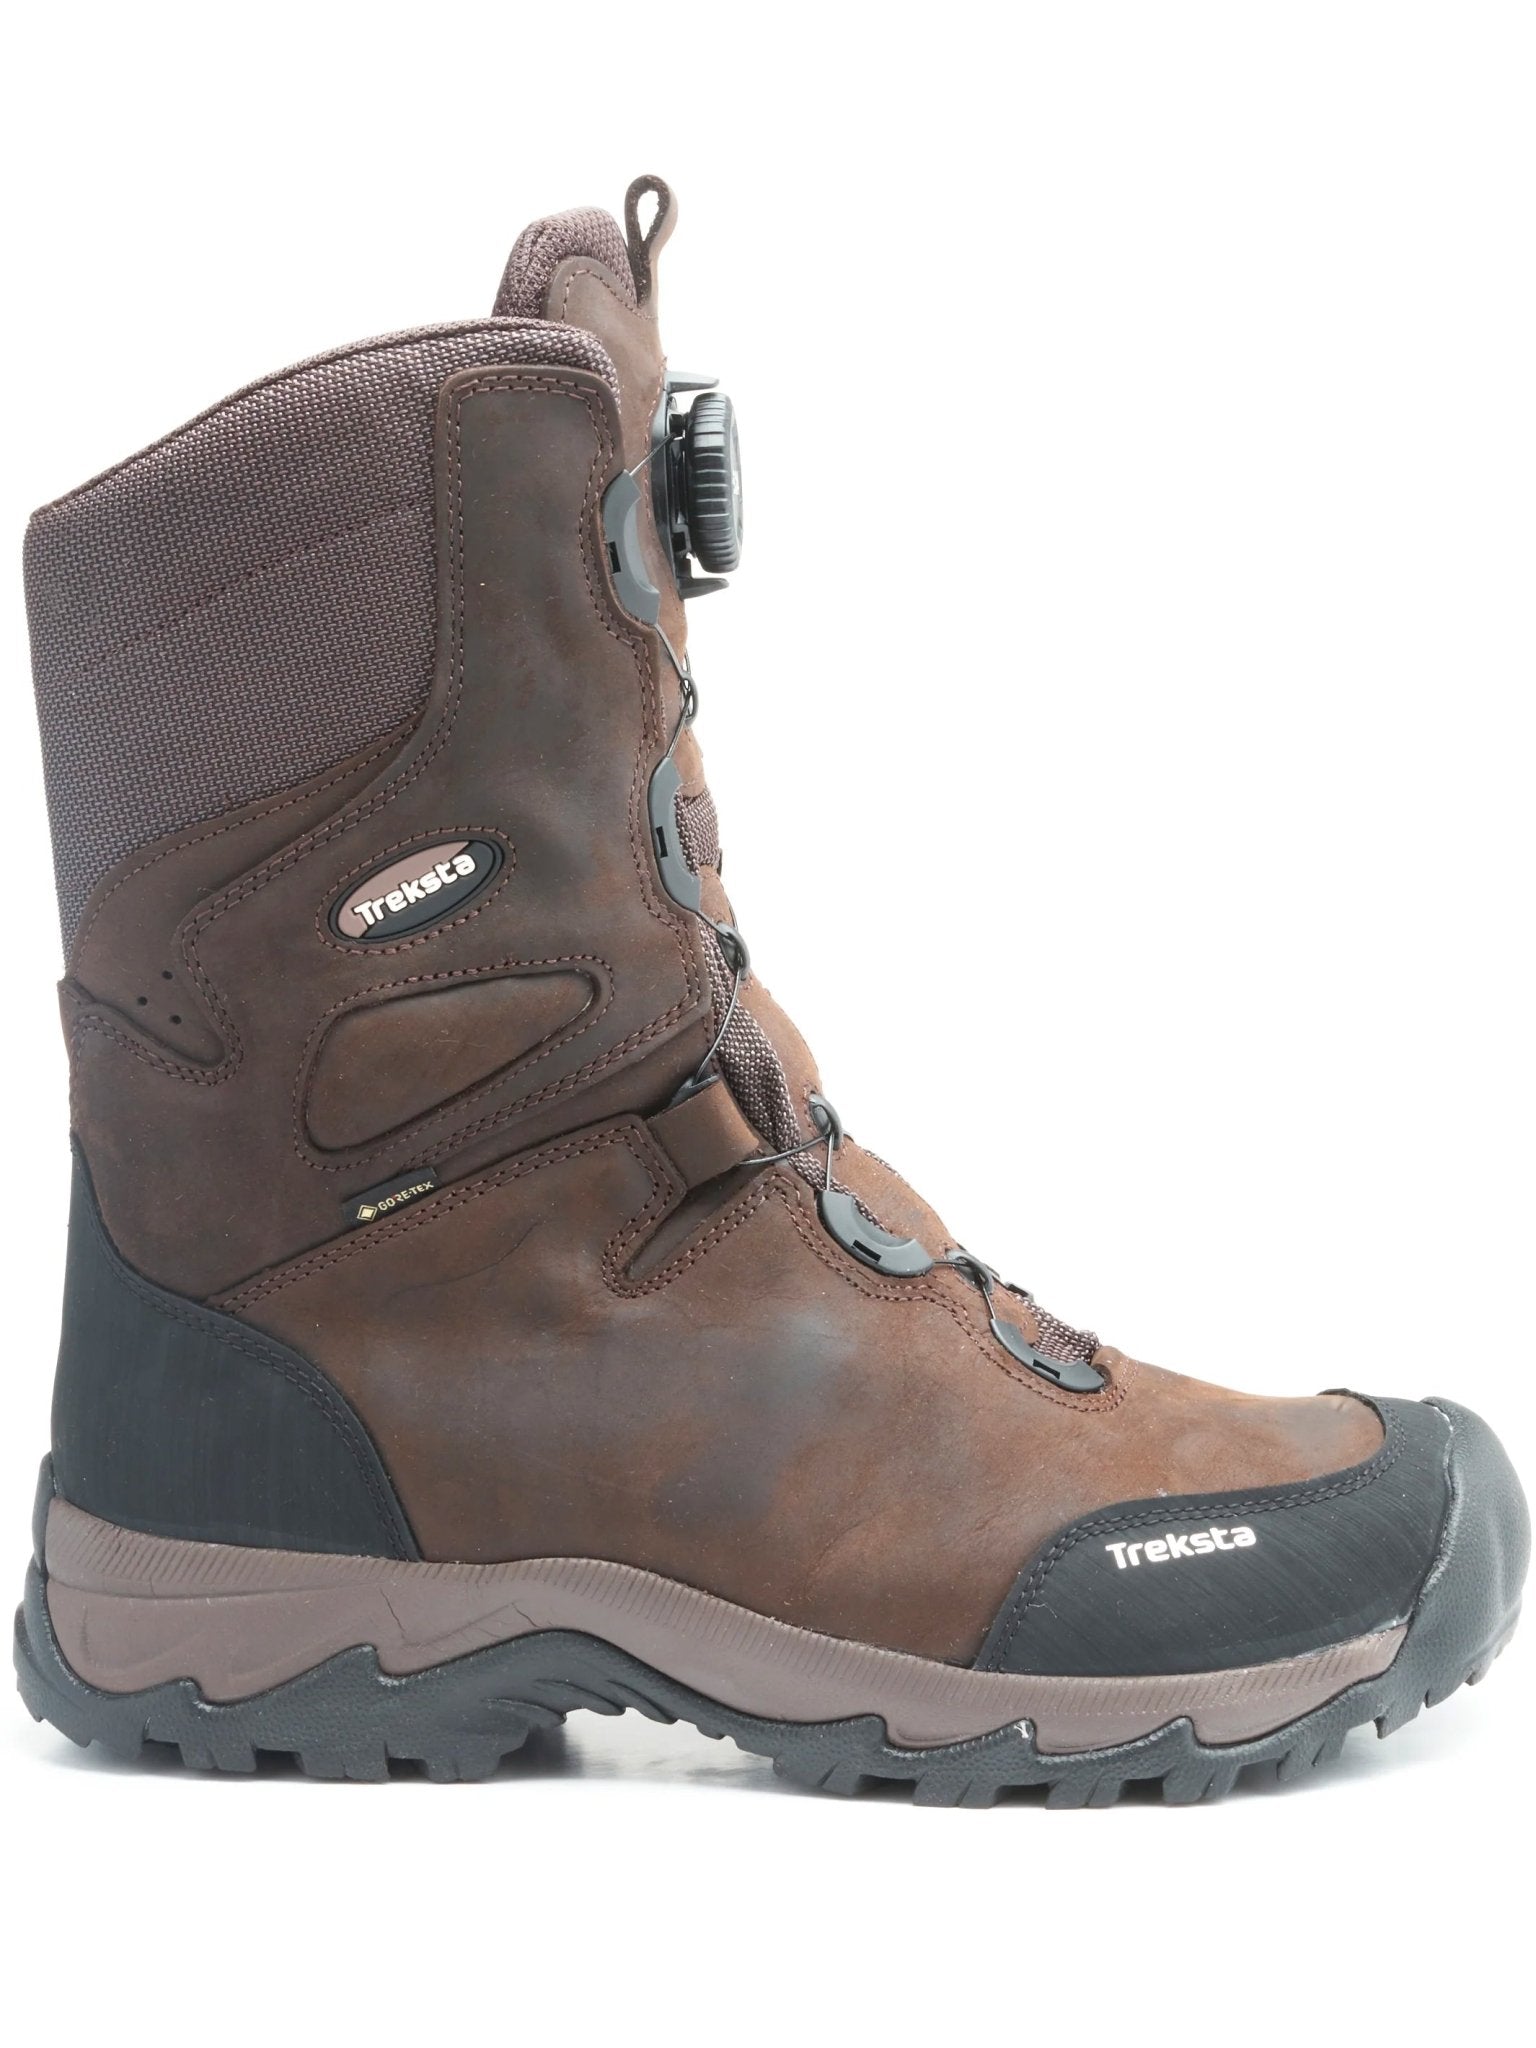 Treksta Treksta - Winchester 10" Gore - Tex Waterproof Boa Lace up system, with Nestfit and Icelock Boots